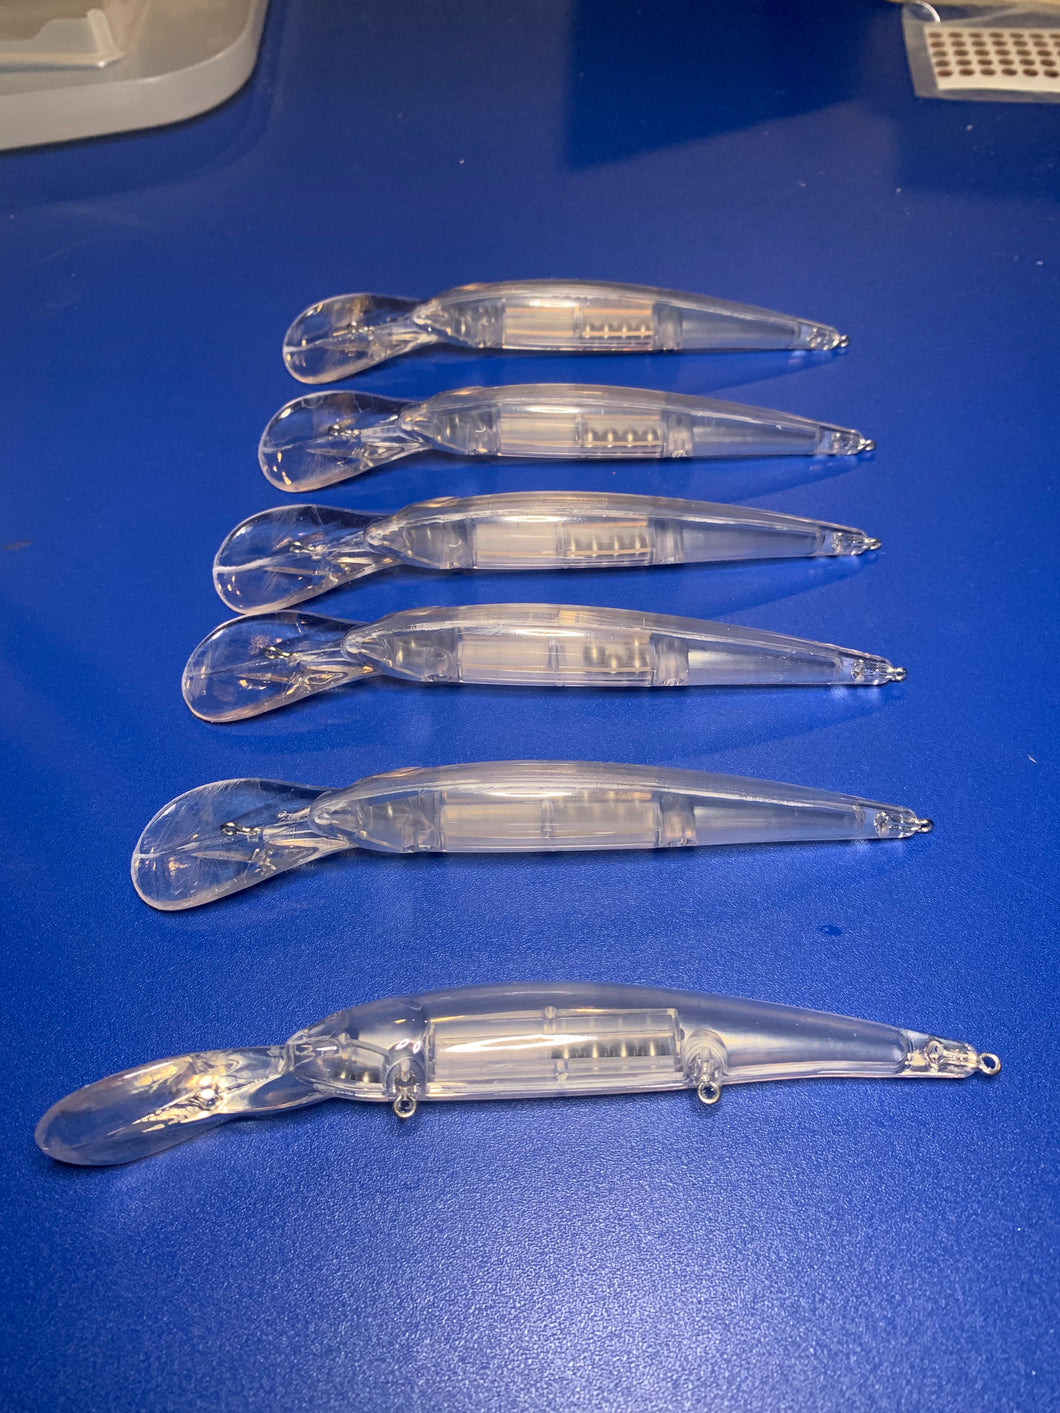 Clear, unpainted Bandit style blanks, 6-pack (blanks only, no hardware)